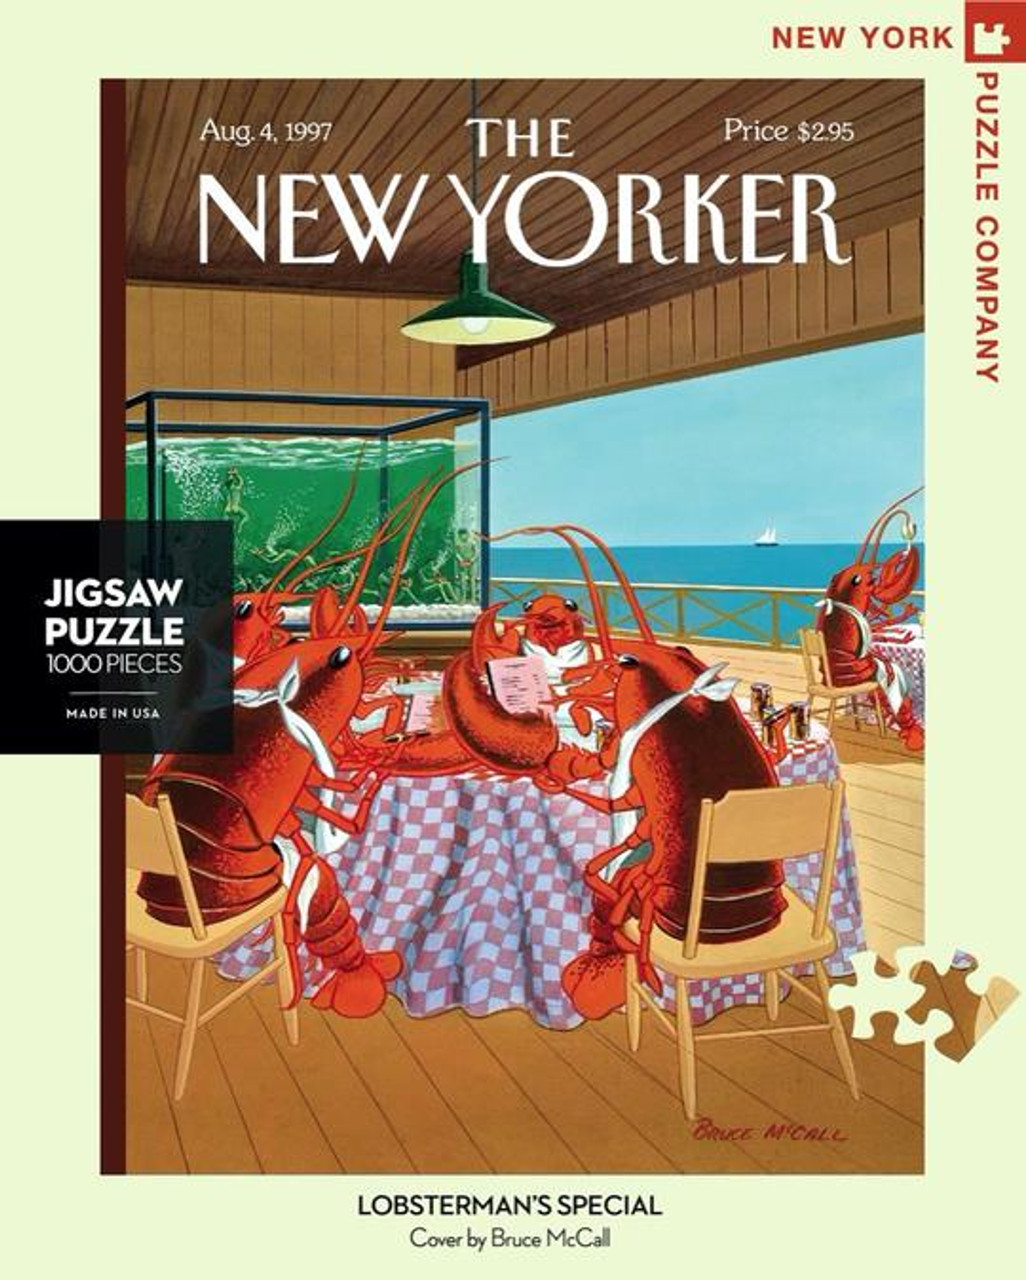 Lobsterman's Special - 1000 pieces - New Yorker